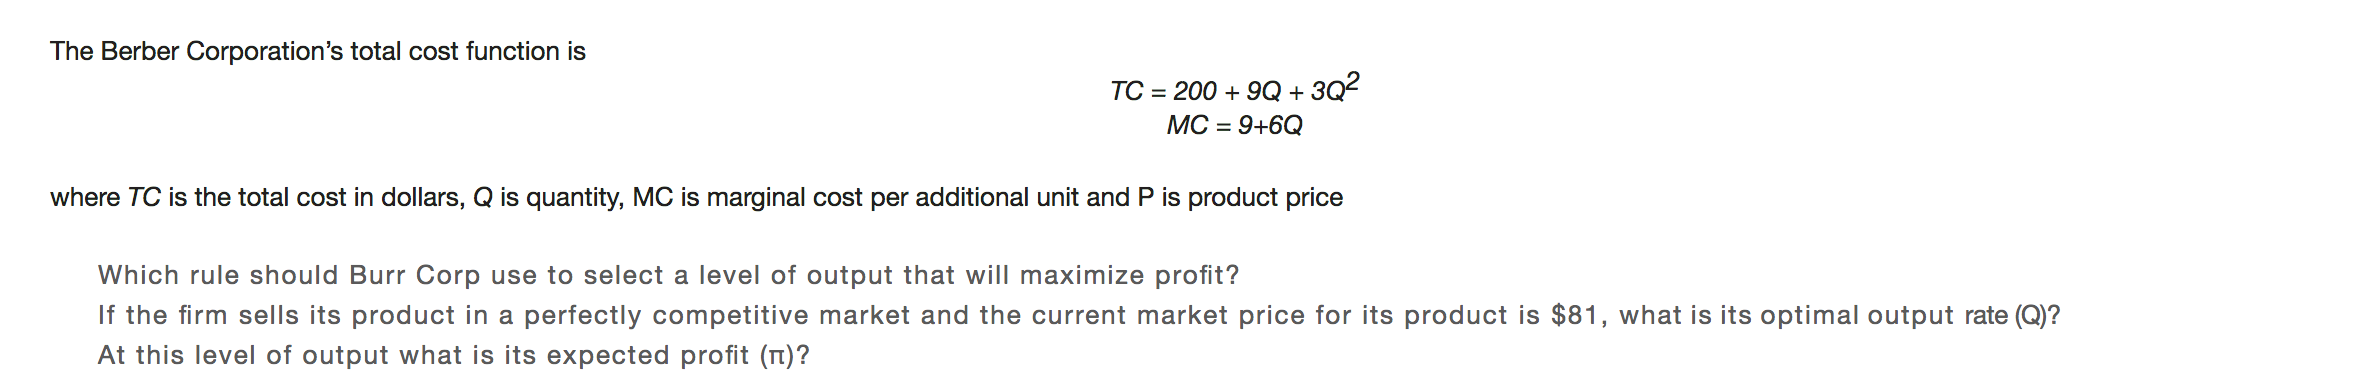 The Berber Corporation's total cost function is
200 9Q + 3Q2
TC
MC 9+6Q
where TC is the total cost in dollars, Q is quantity, MC is marginal cost per additional unit and P is product price
Which rule should Burr Corp use to select a level of output that will maximize profit?
If the firm sells its product in a perfectly competitive market and the current market price for its product is $81, what is its optimal output rate (Q)?
At this level of output what is its expected profit (n)?
